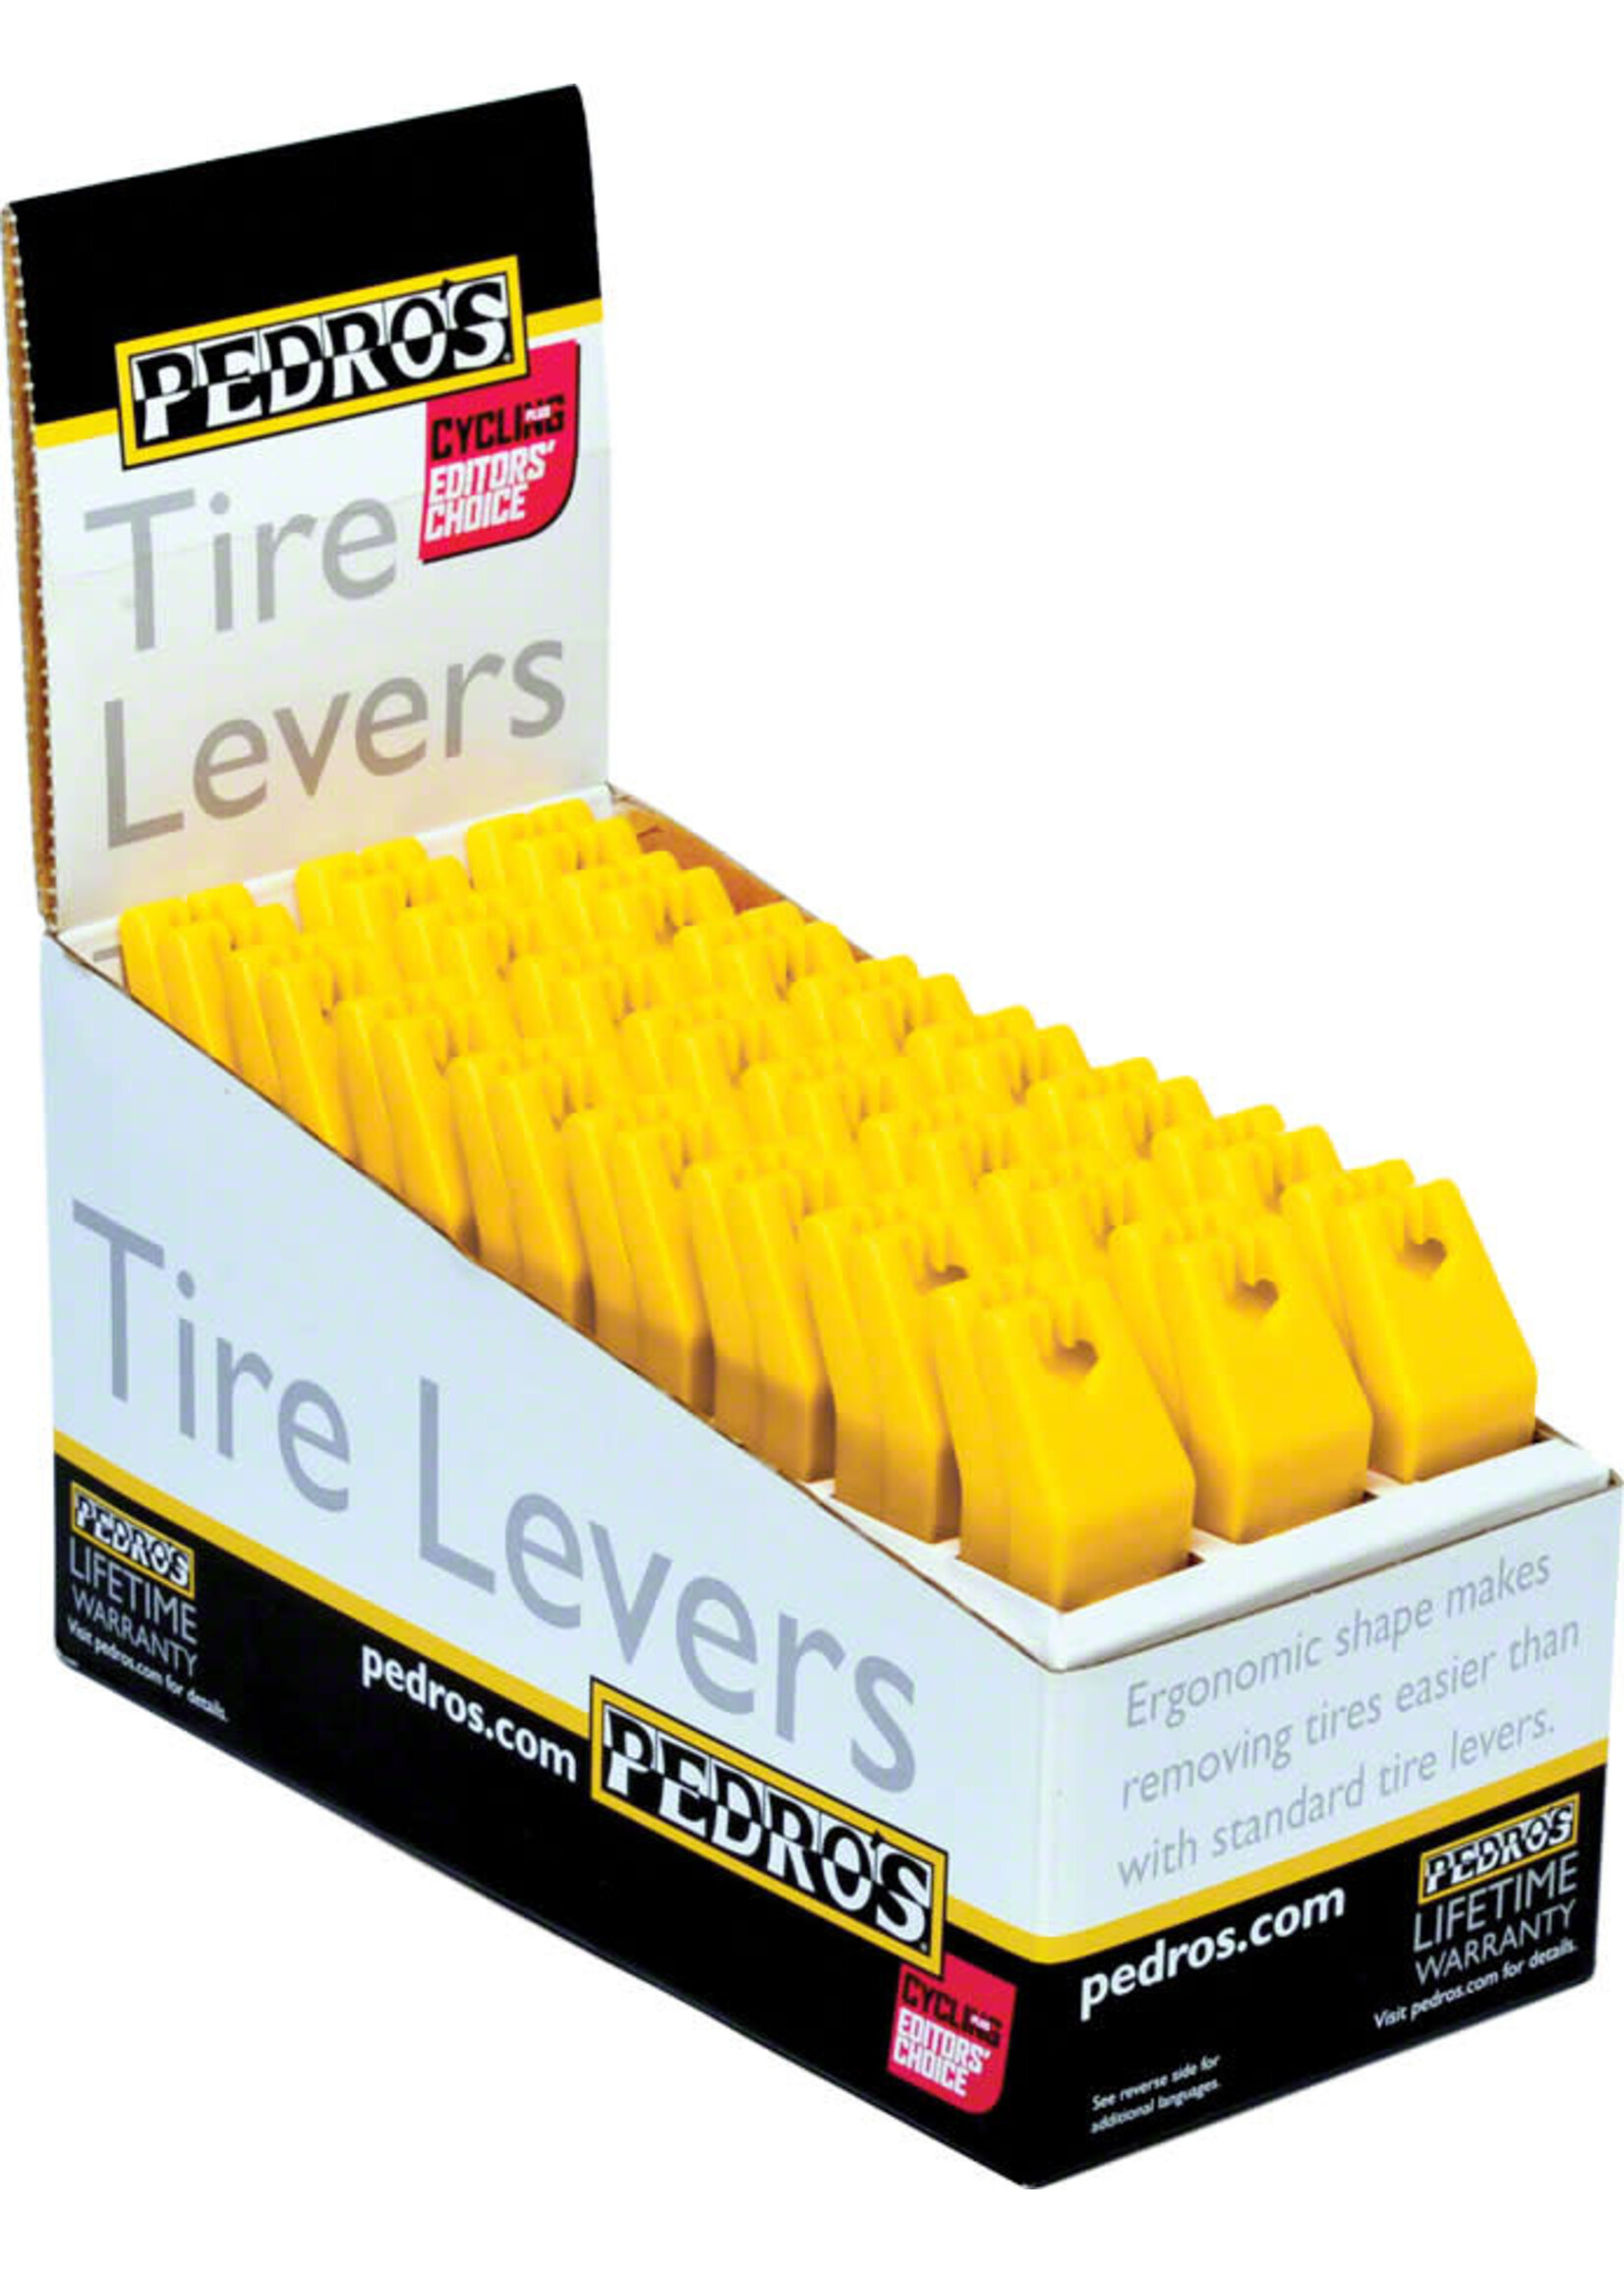 Pedro's Pedro's Tire Levers 24x2 Pack Tire Lever Counter Display, Yellow